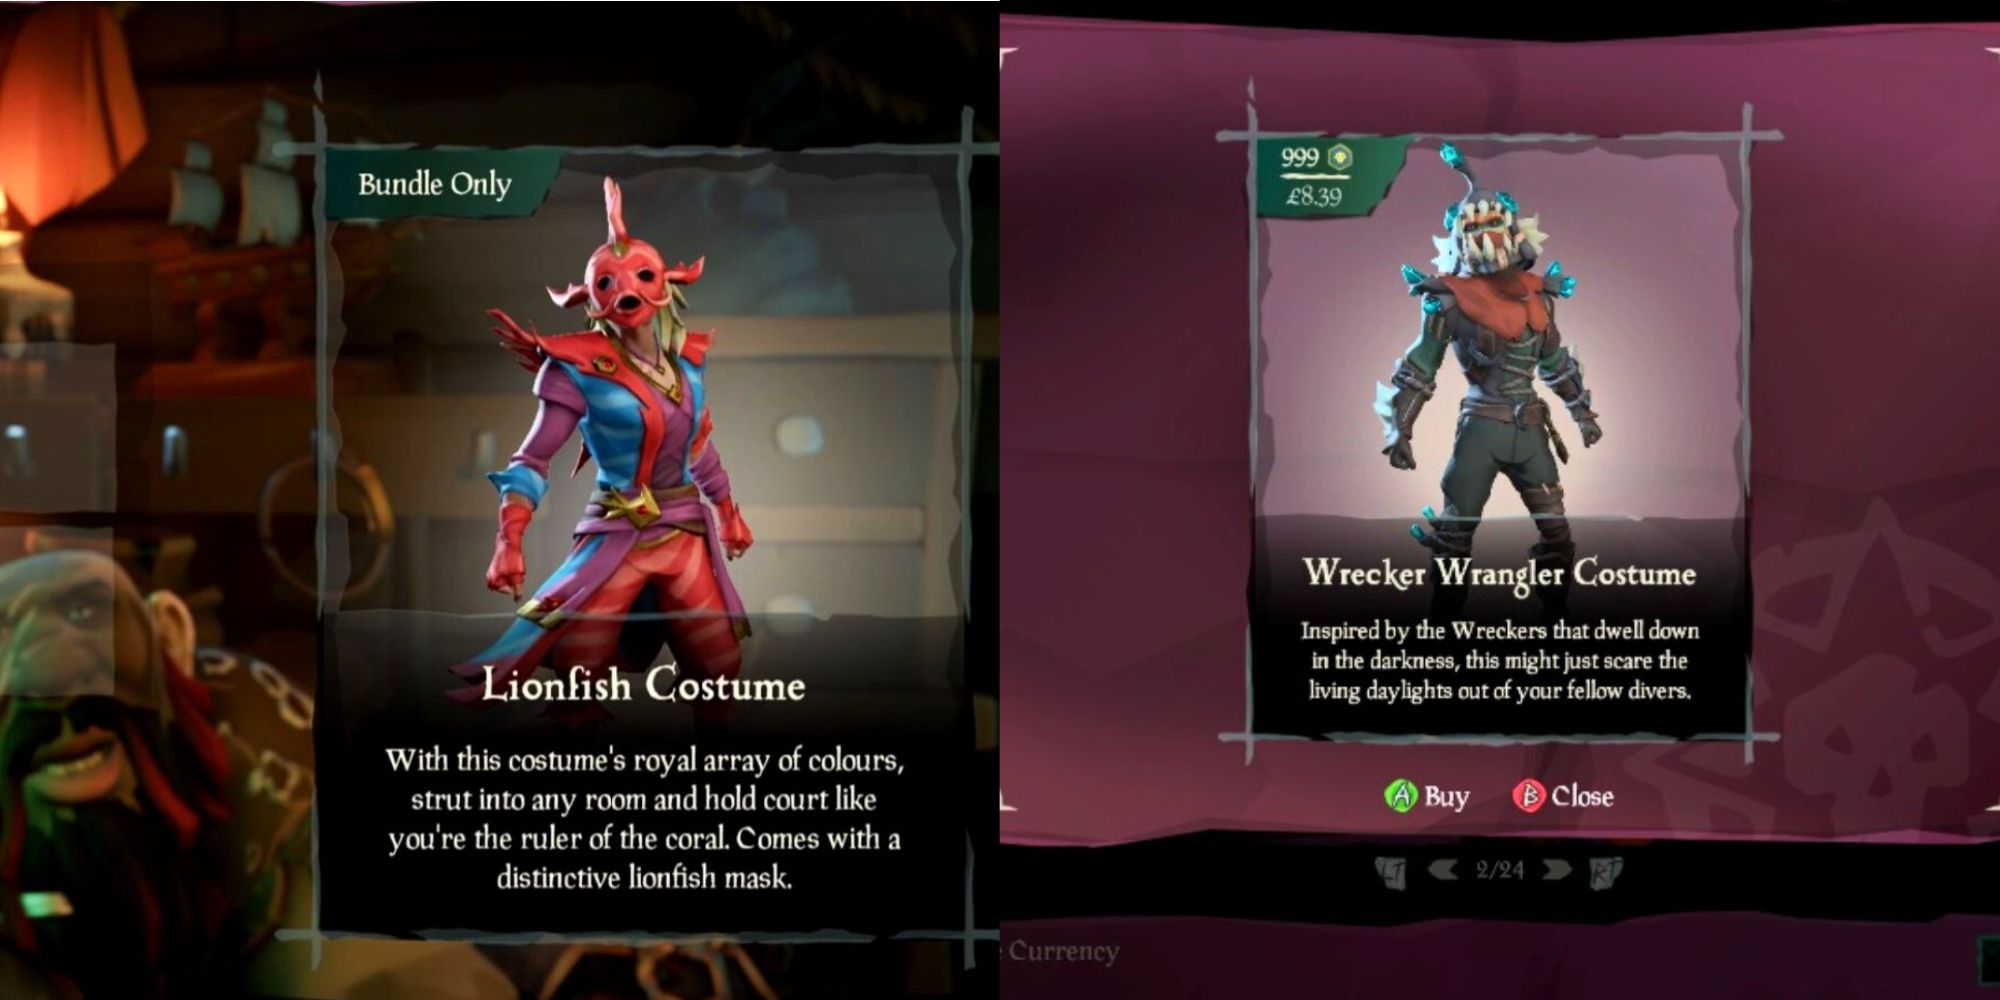 The Lionfish And Wrecker Wrangler Costumes In Sea Of Thieves